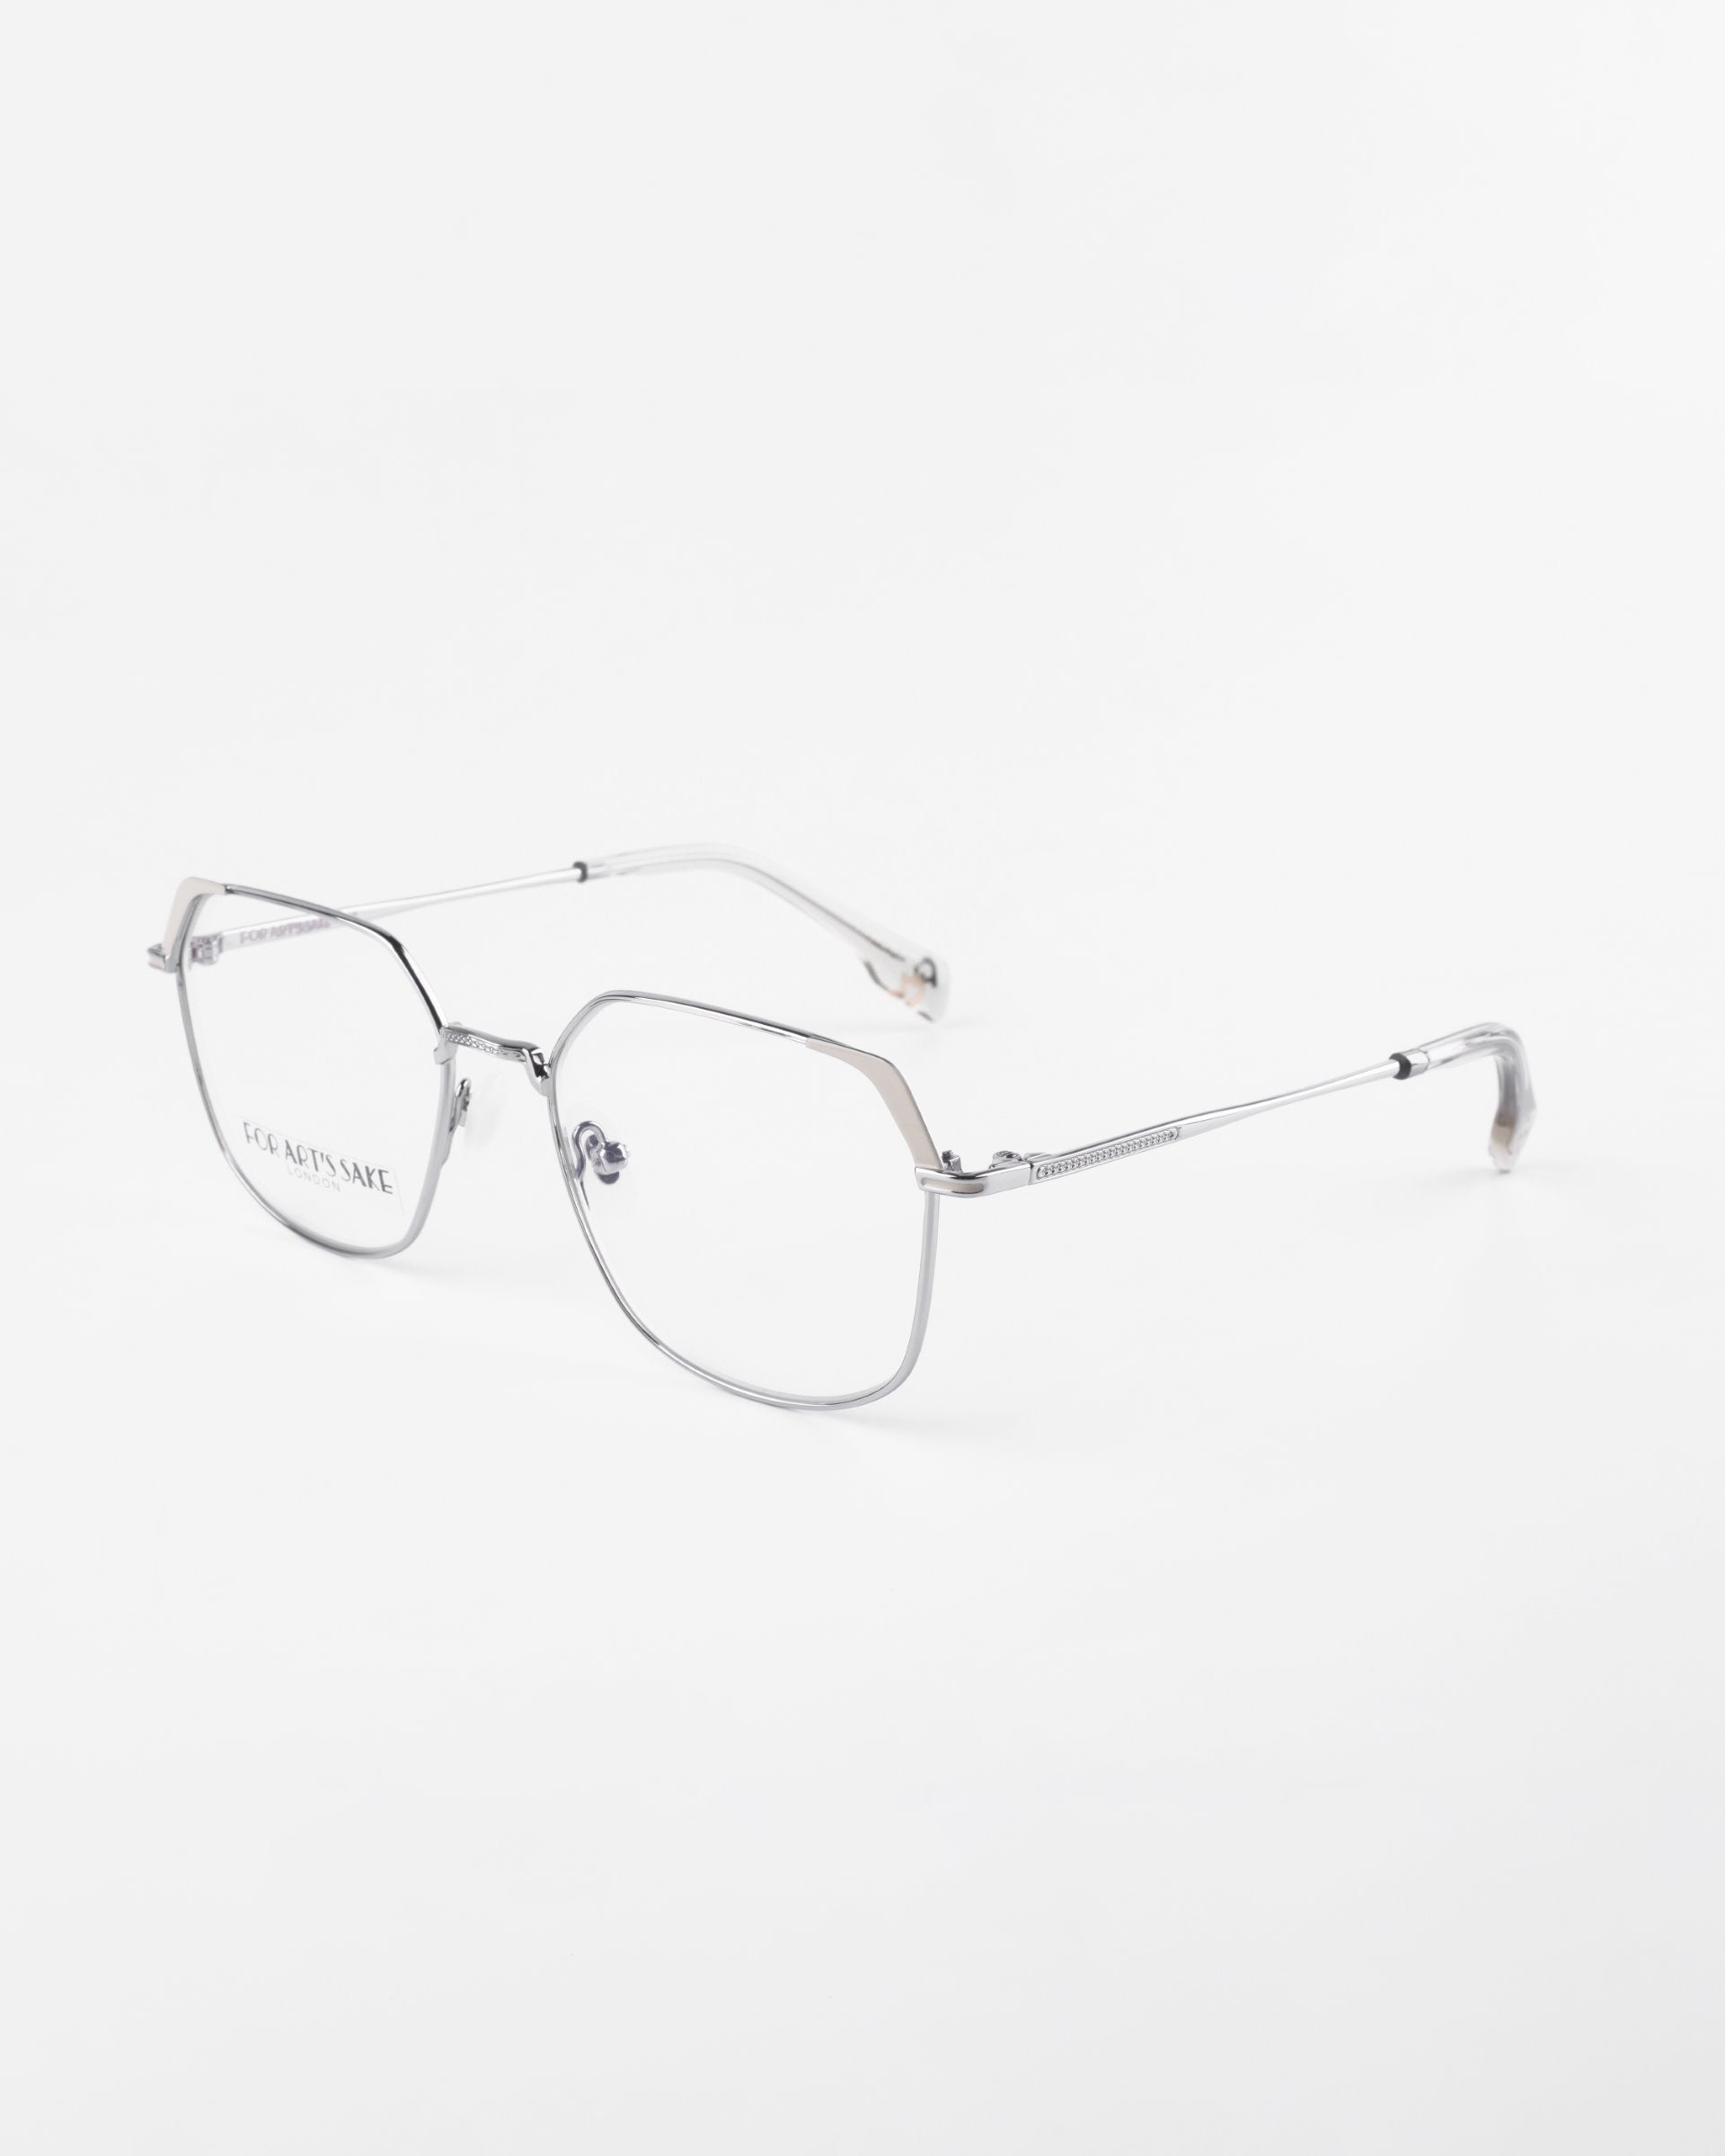 A pair of silver metal eyeglasses with a minimalist design on a white background. The frames have a thin, rounded rectangle shape with clear prescription lenses featuring a blue light filter, adjustable nose pads, and slim arms. The brand name &quot;For Art&#39;s Sake®&quot; is visible on the left lens.